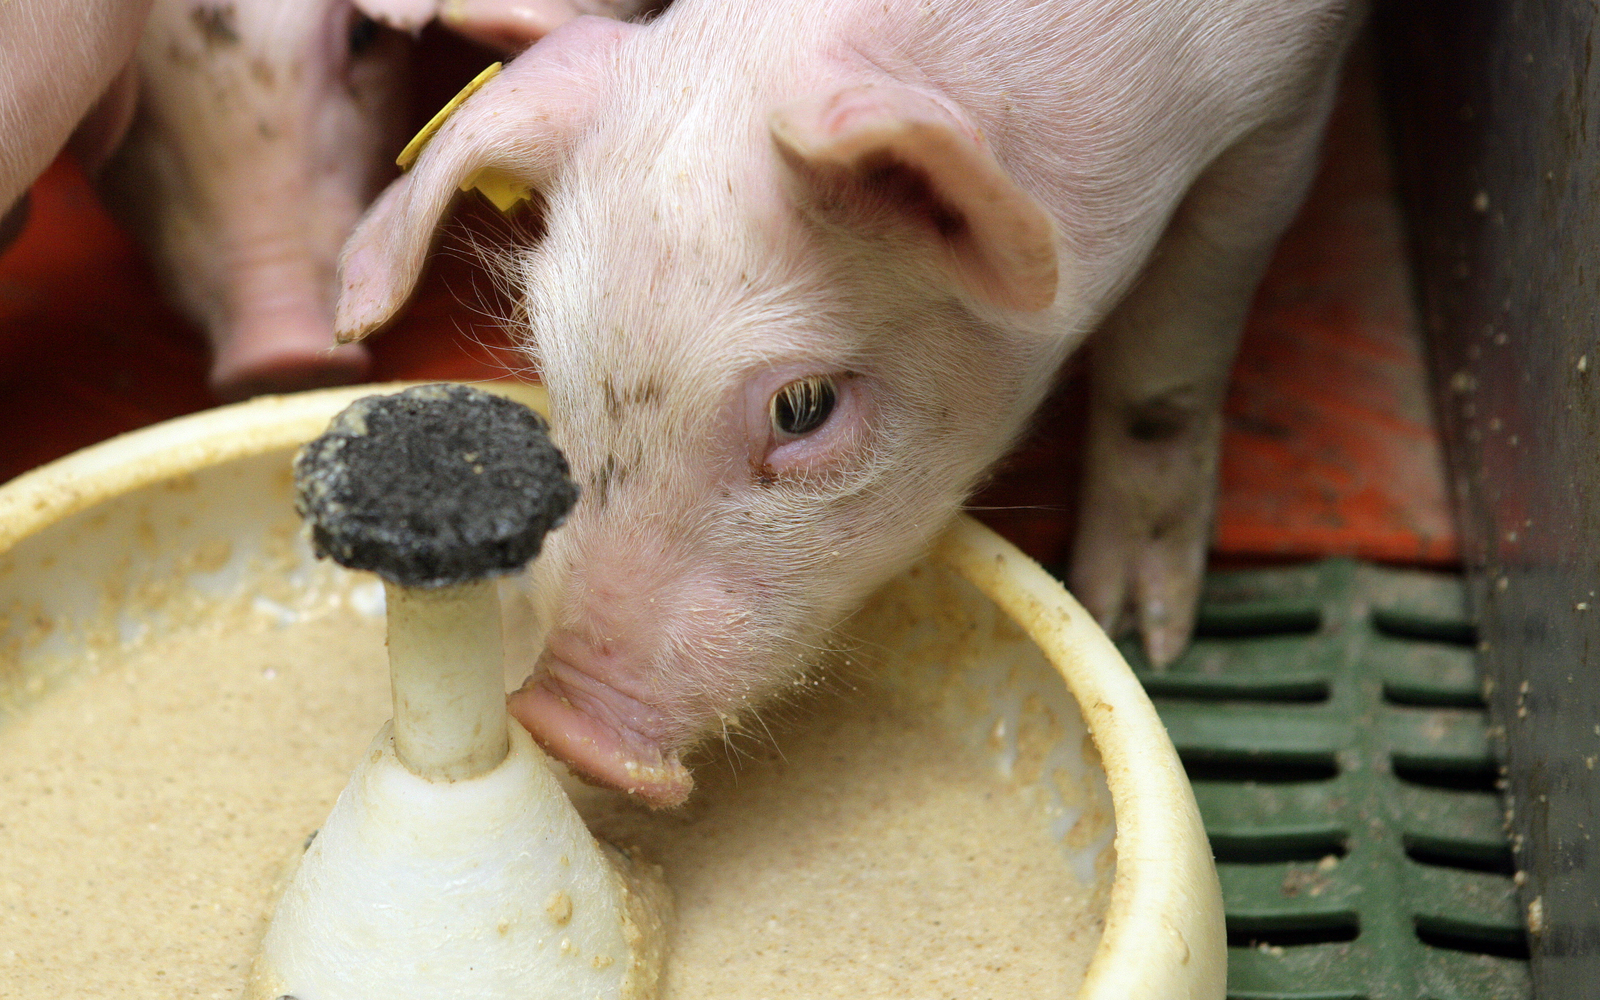 The practical implication of this report is that most current formulation practices using digestibility values based on growing and finishing pigs inherently over-estimate the true digestibility of the raw materials for the weaned piglet.